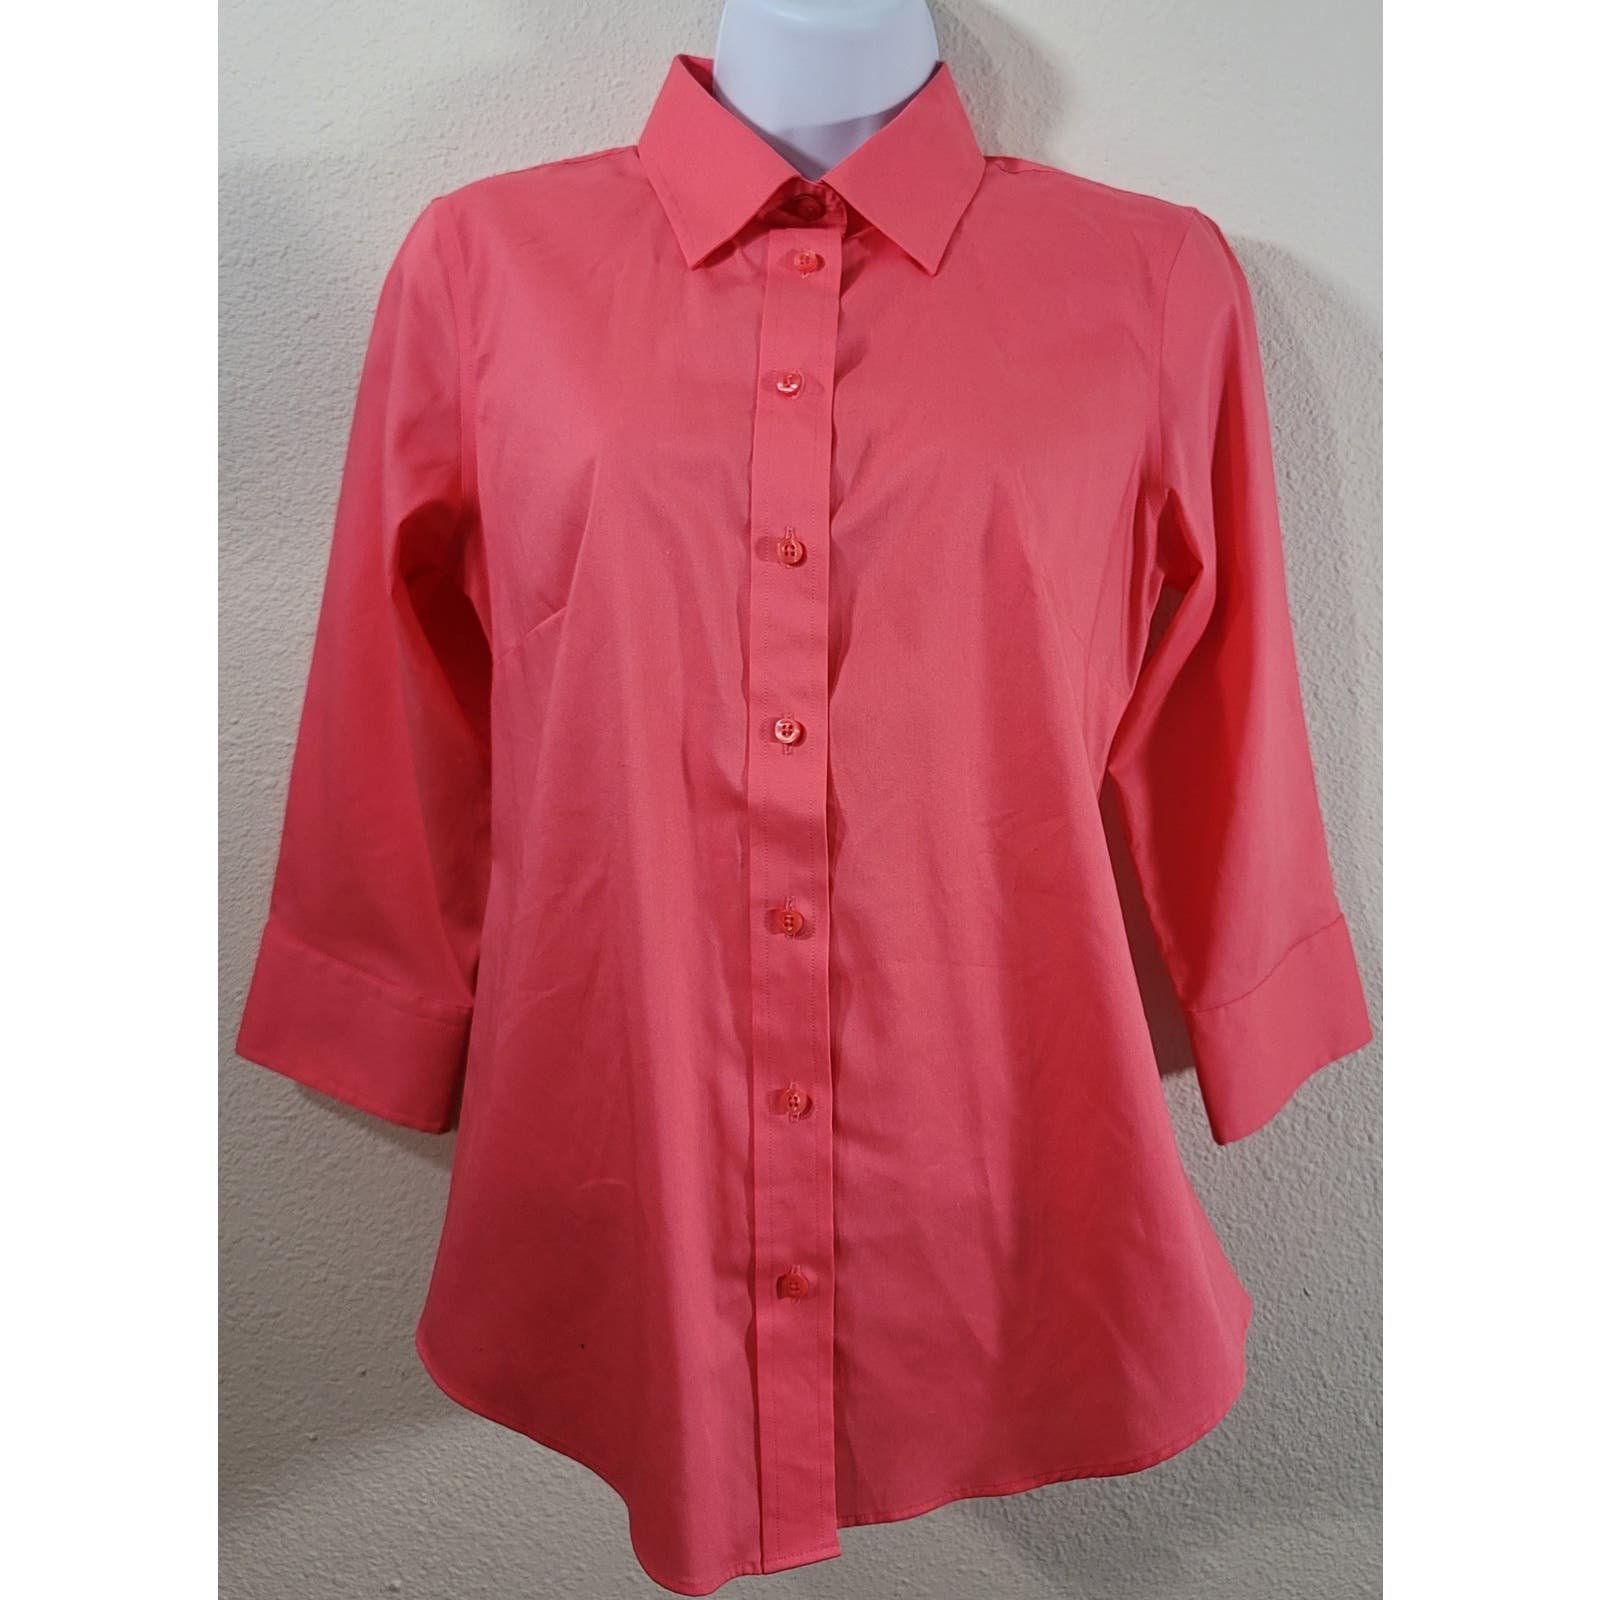 good price Kirkland Signature Pink Orange Button Up Top Small New Without Tags Lightweight plNQzCJLc Wholesale